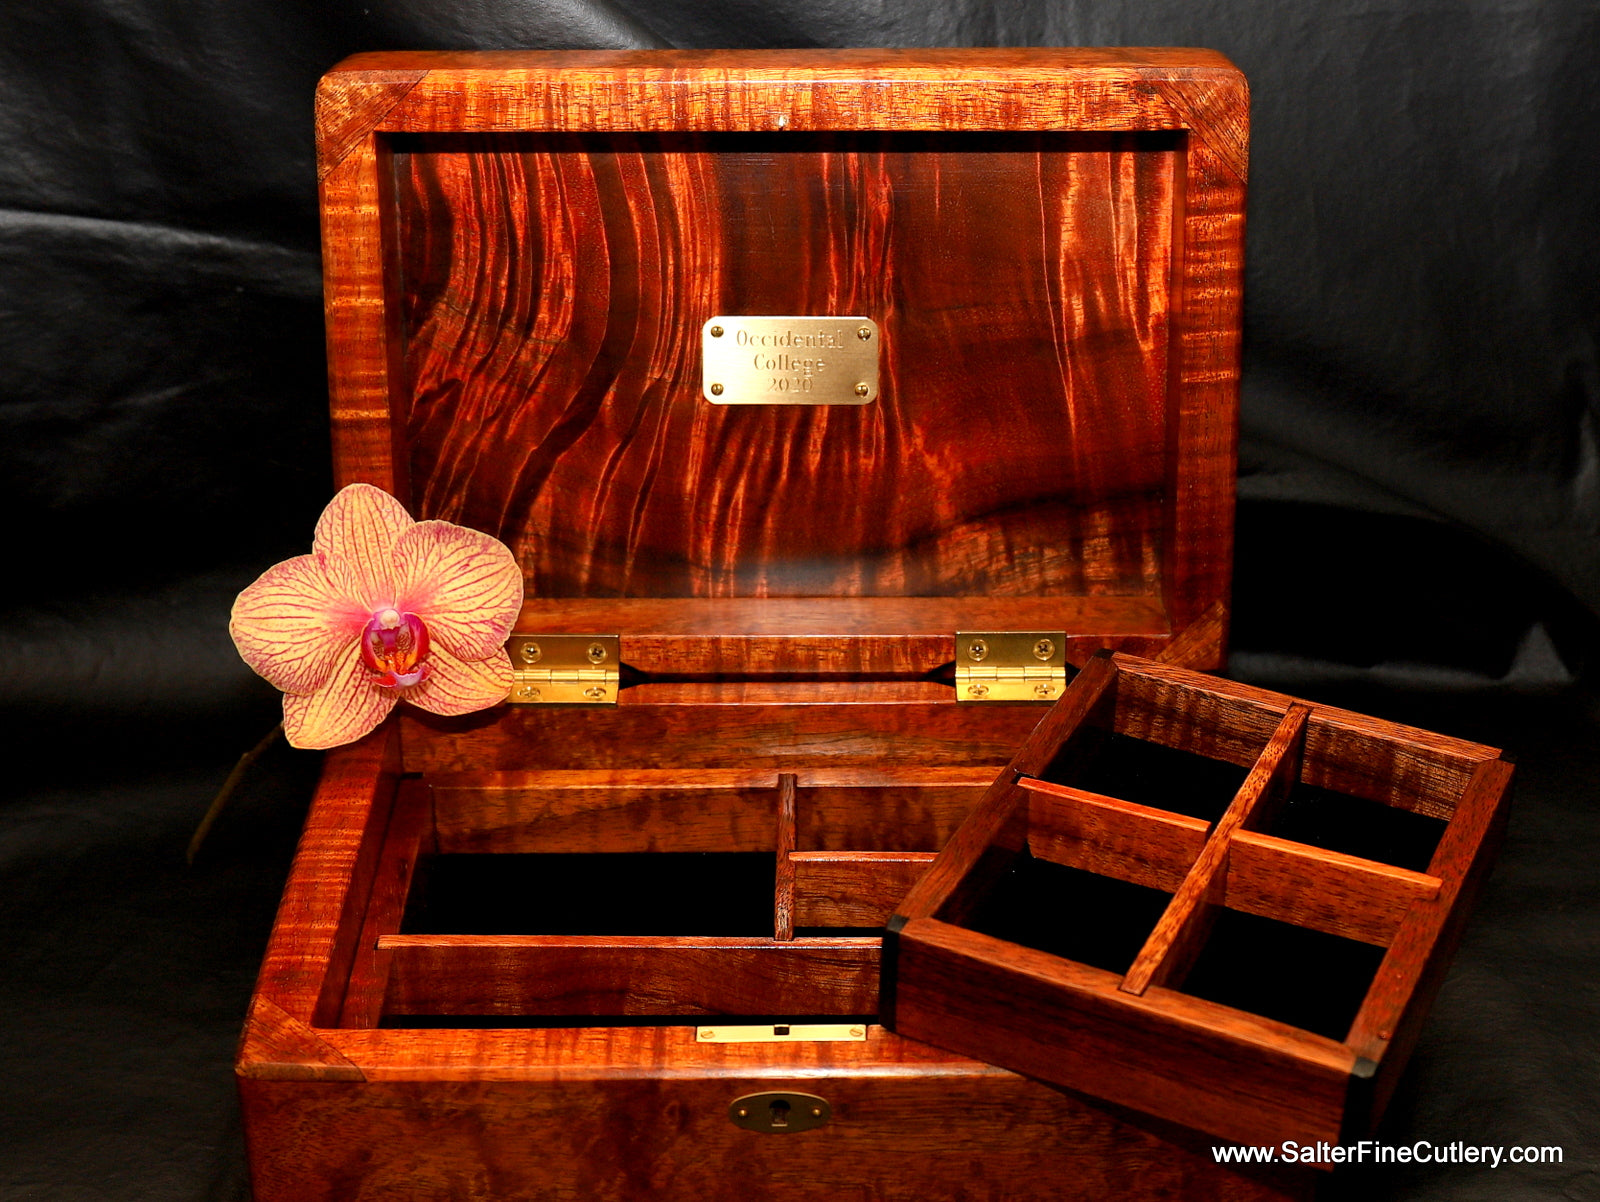 Ladies special request jewelry box with custom trays and engraved plate by Salter Fine Cutlery of Hawaii